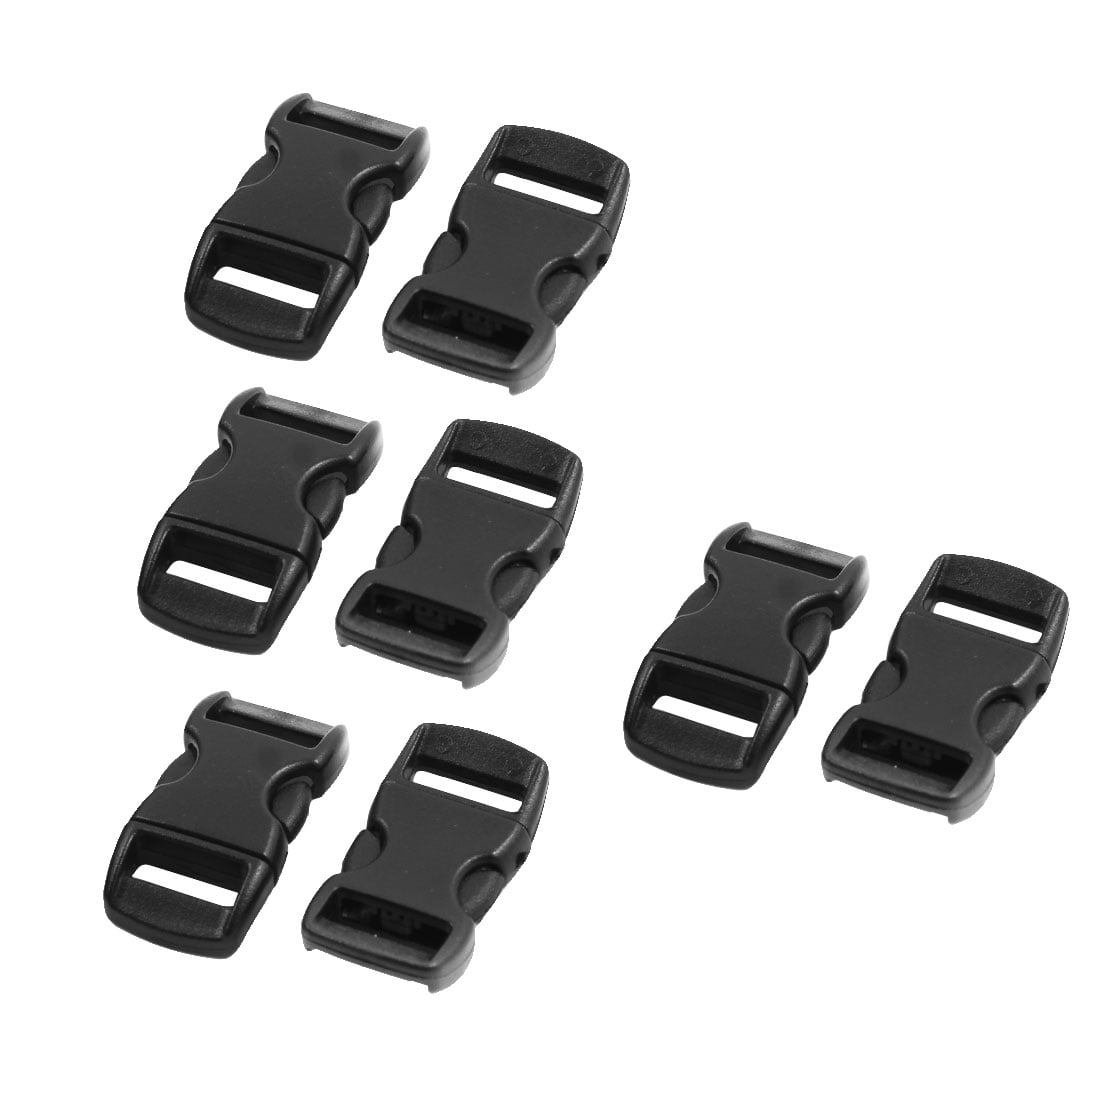 DealMux Plastic Backpack Connecting Side Quick Release Buckle 11mm Strap Width 10pcs Black